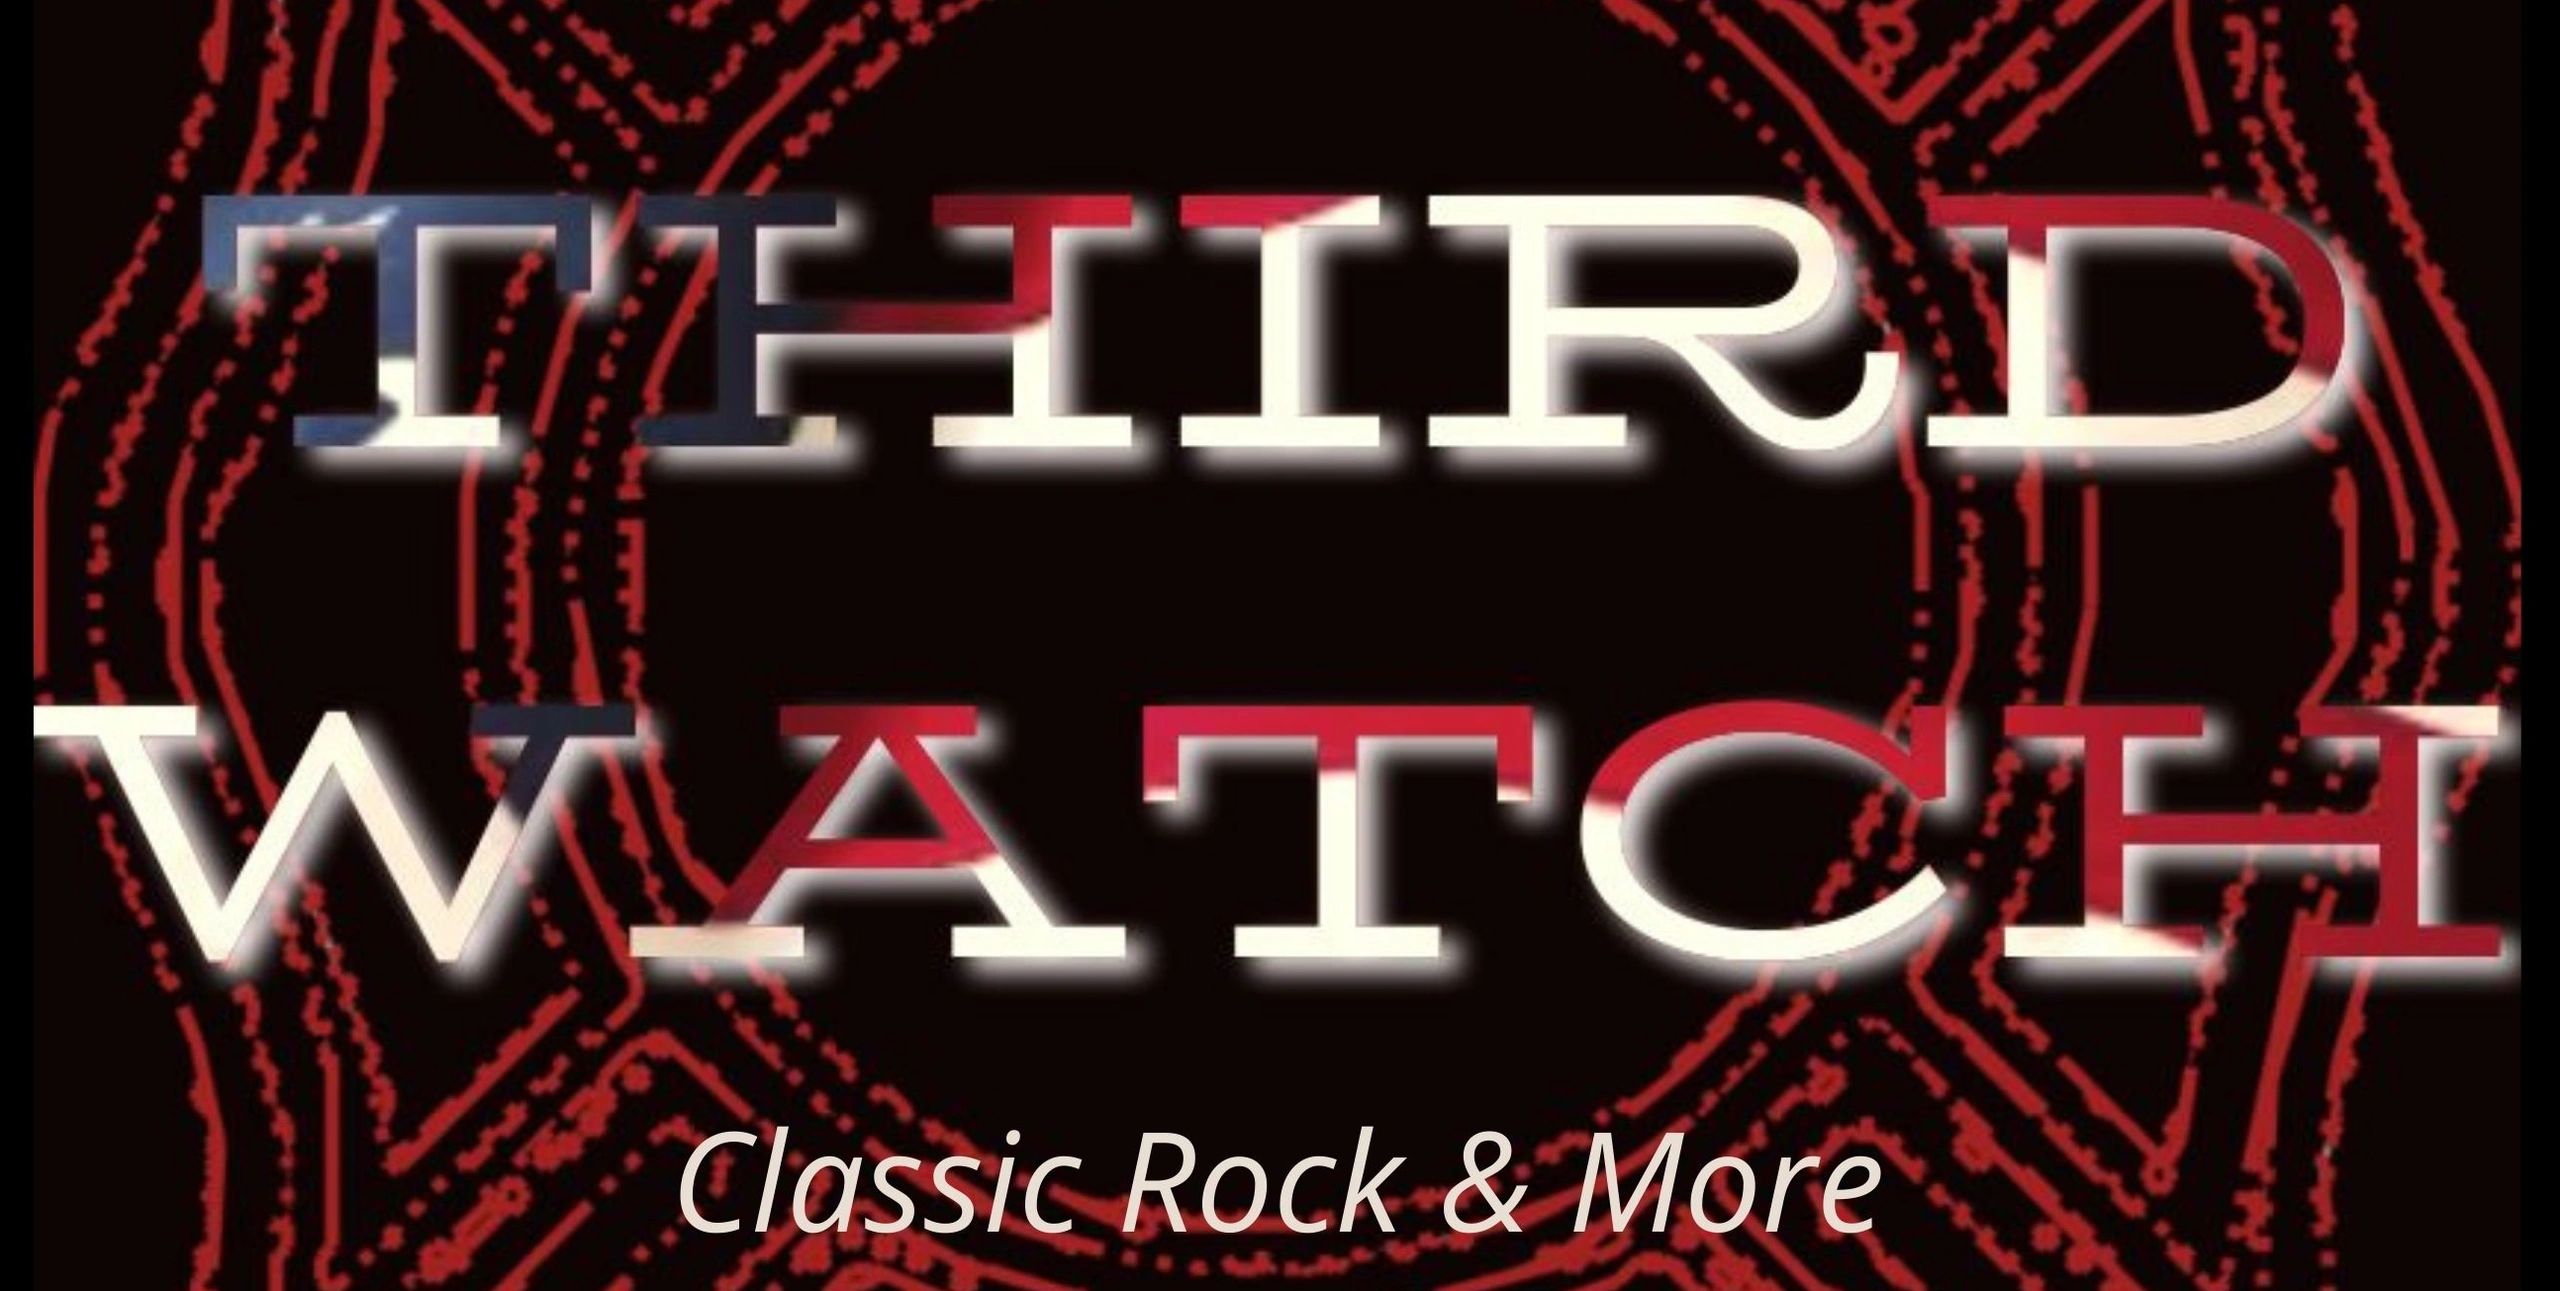 Third Watch is a 'classic rock & more' live band that plays primarily in the Phoenix metro area,